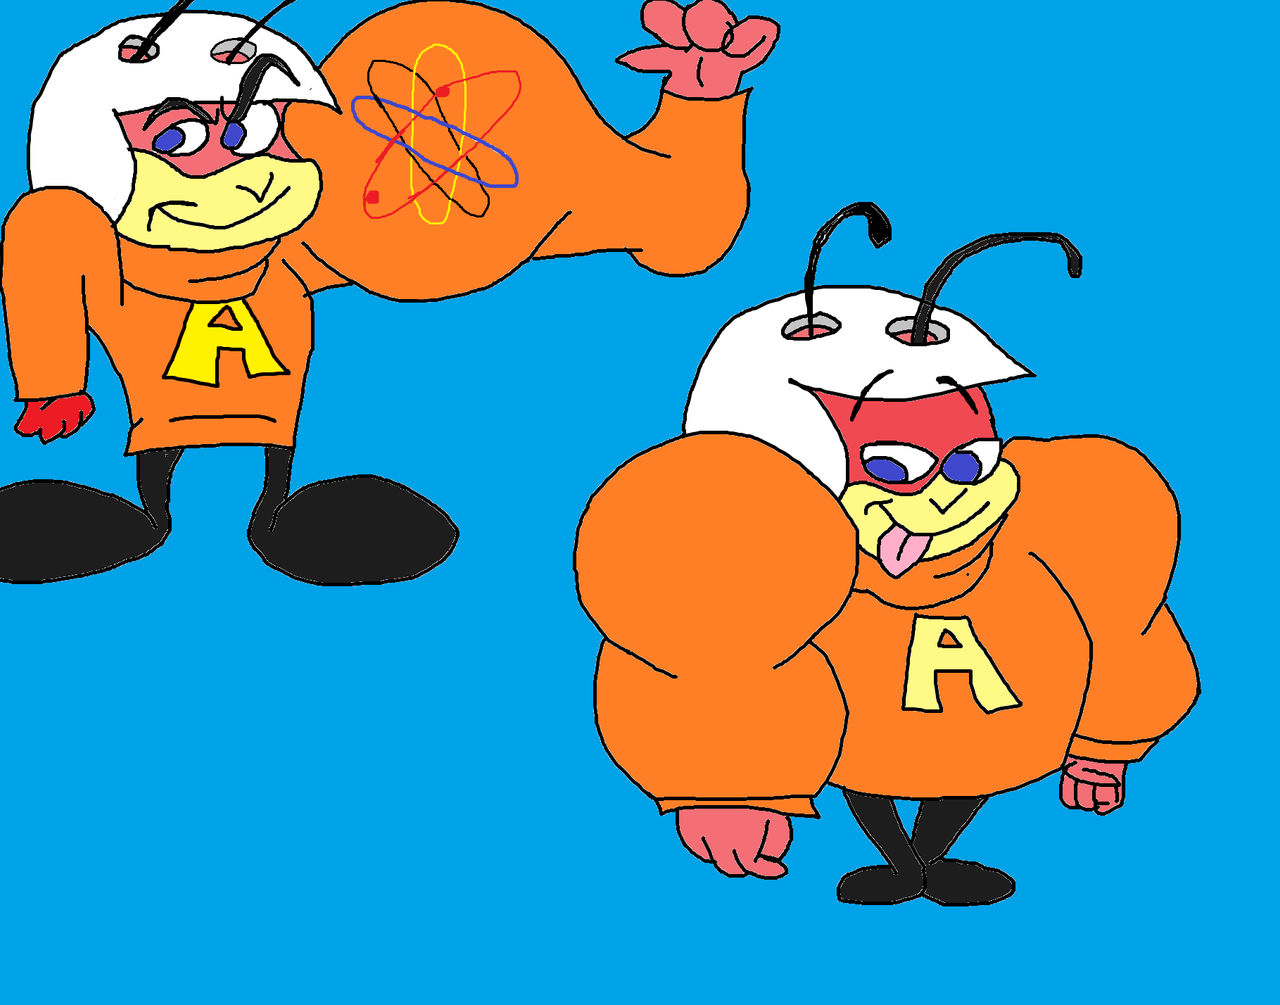 Atom Ant In Johnk Style by rayqwancartoonist99 on DeviantArt